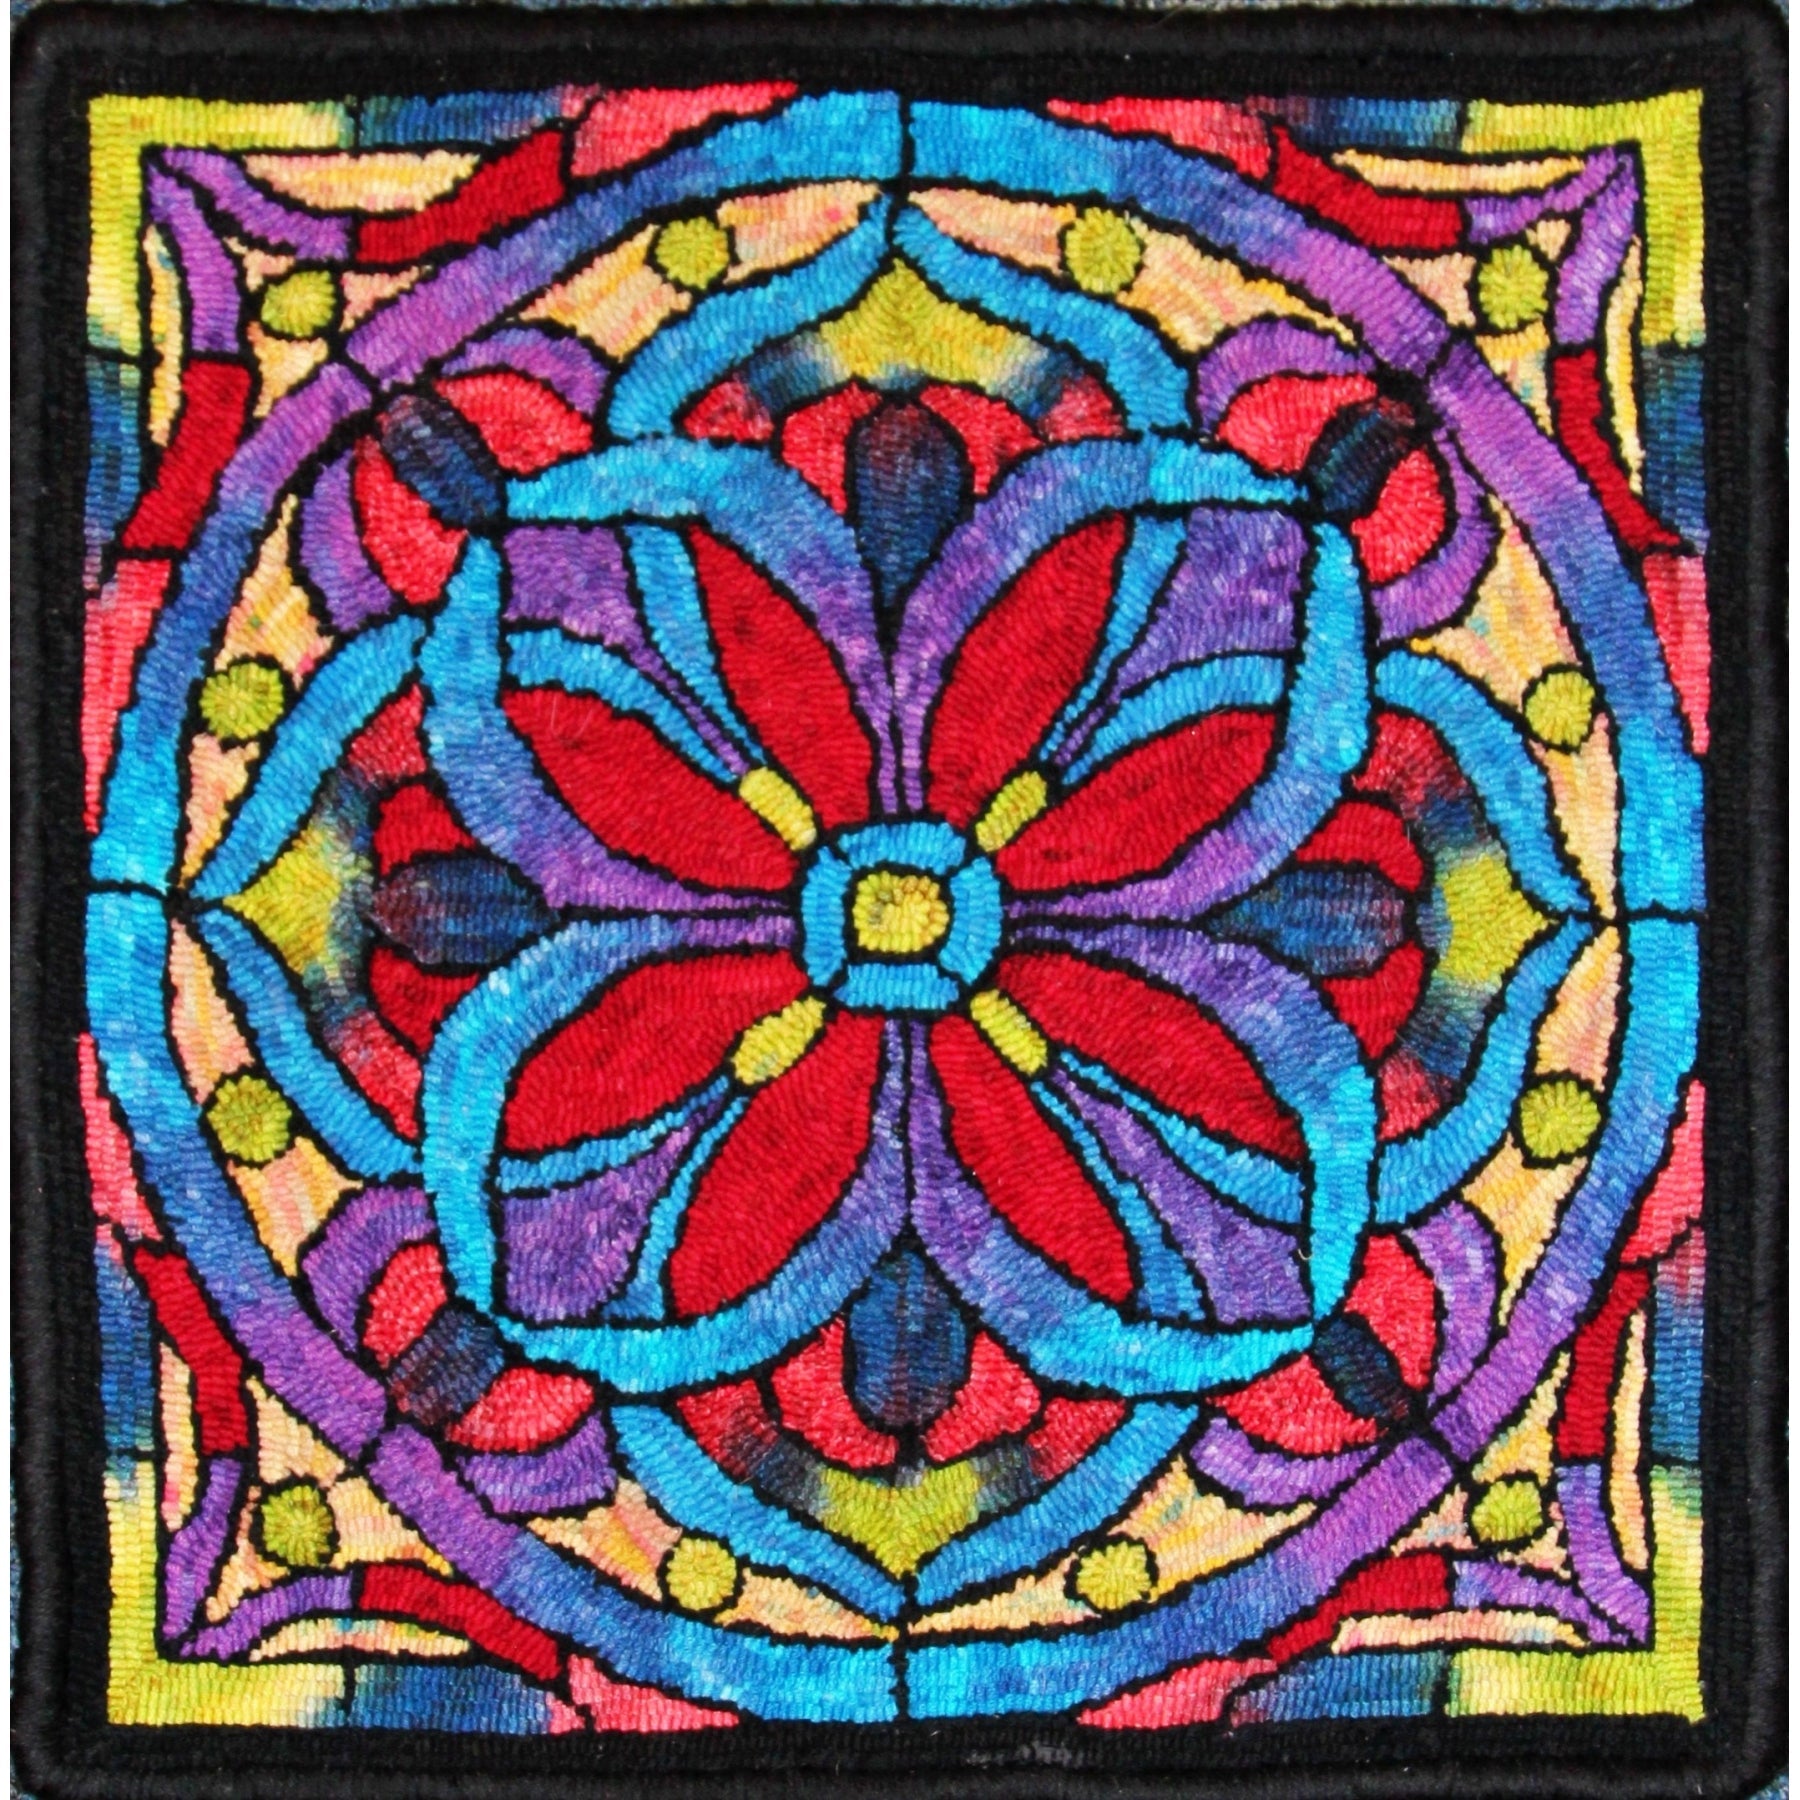 Boehm Stained Glass Blog: Rug Design in Stained Glass - Soldered